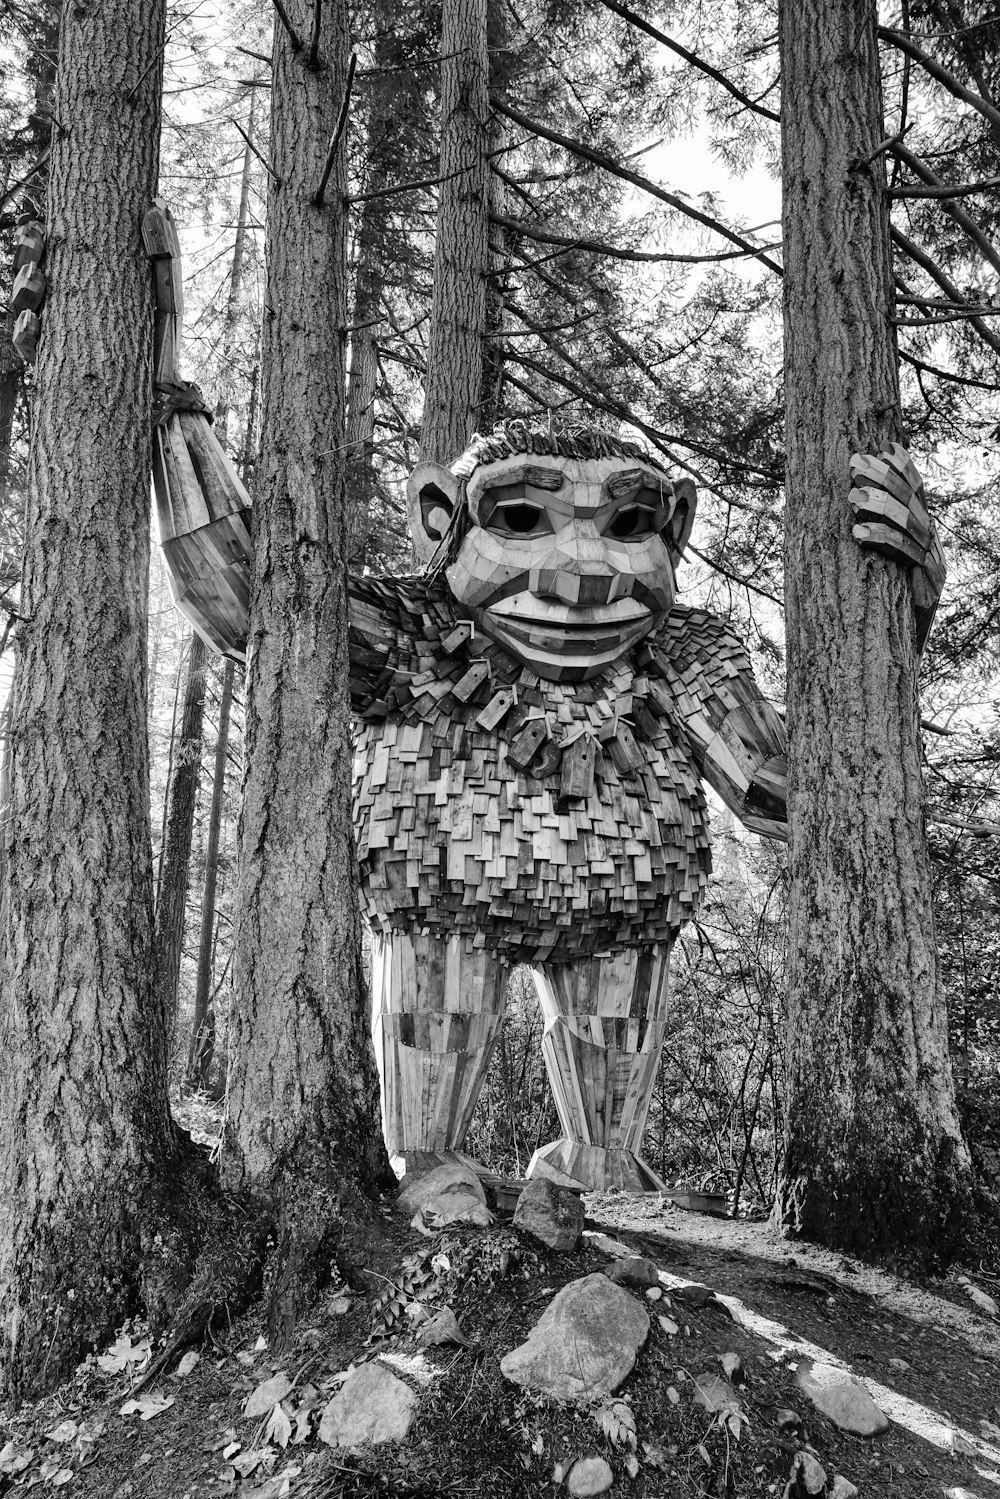 a statue of a creature in the middle of a forest